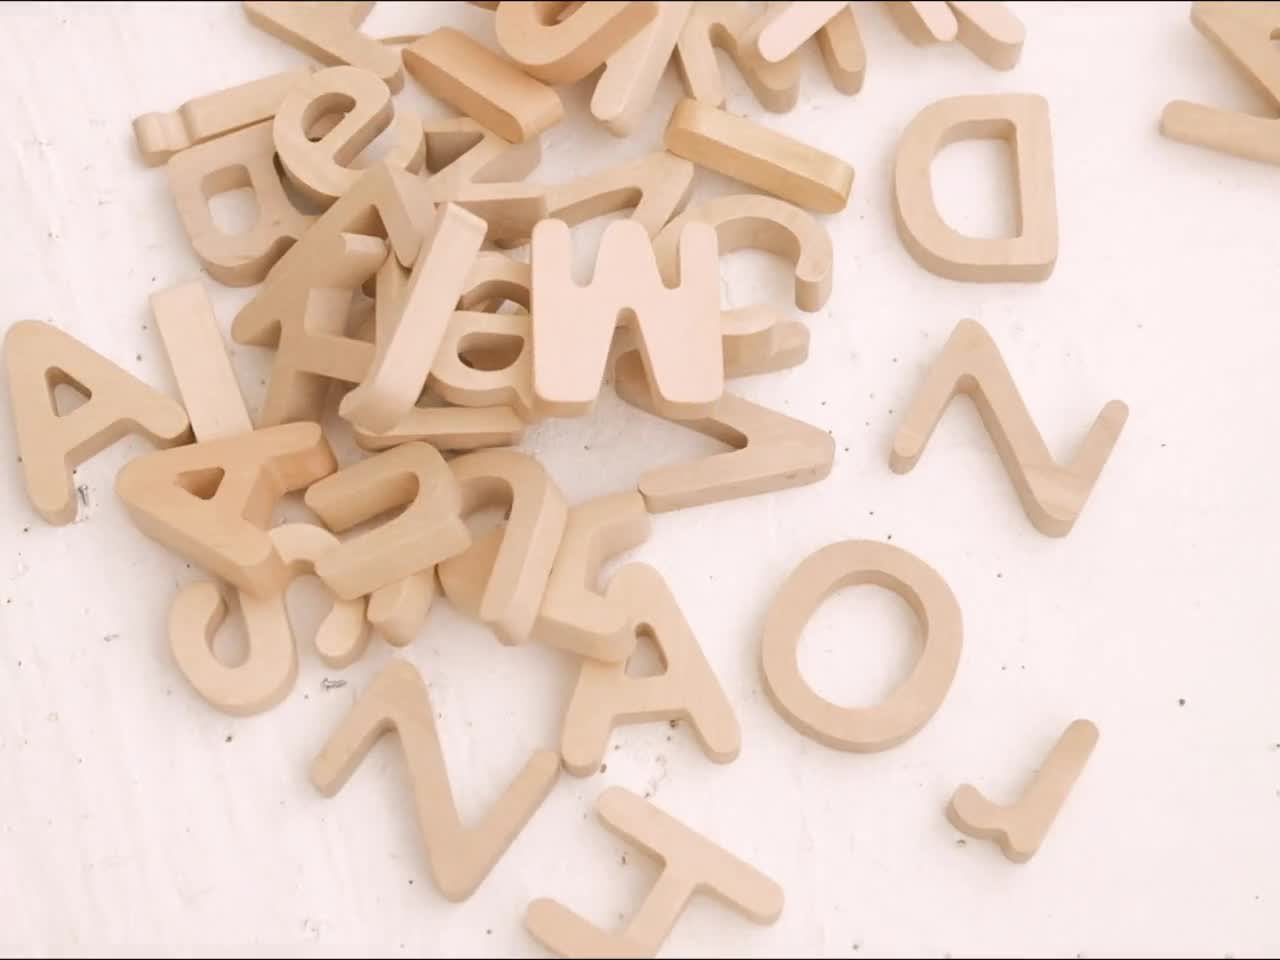 Kids Natural Wooden Alphabet Letters Learning Spelling For School Arts & Crafts 